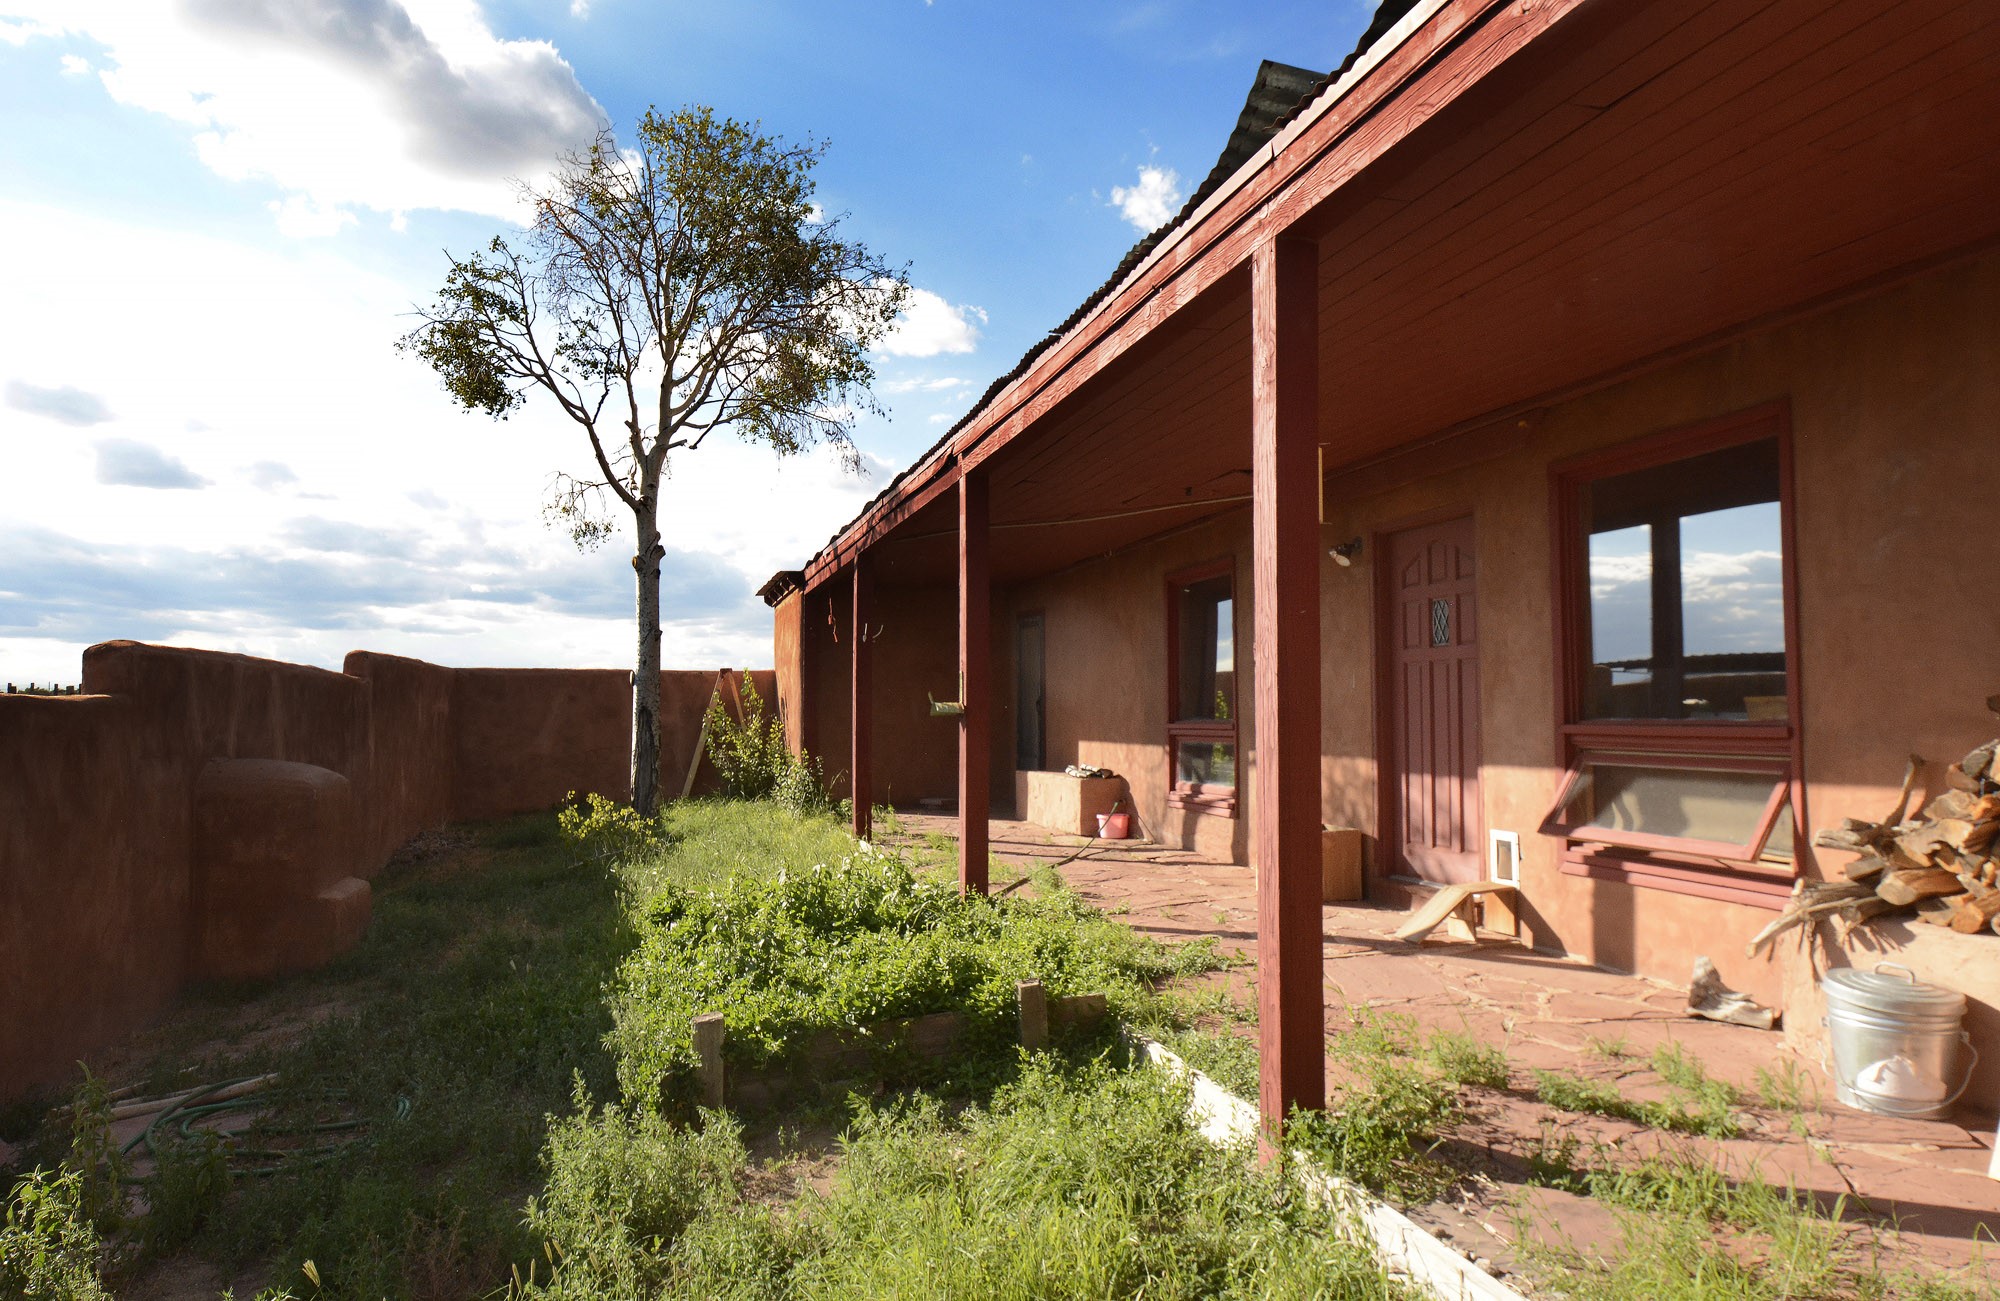 37 Dawn Trail, Santa Fe, New Mexico 87508, 3 Bedrooms Bedrooms, ,2 BathroomsBathrooms,Residential,For Sale,37 Dawn Trail,202232479